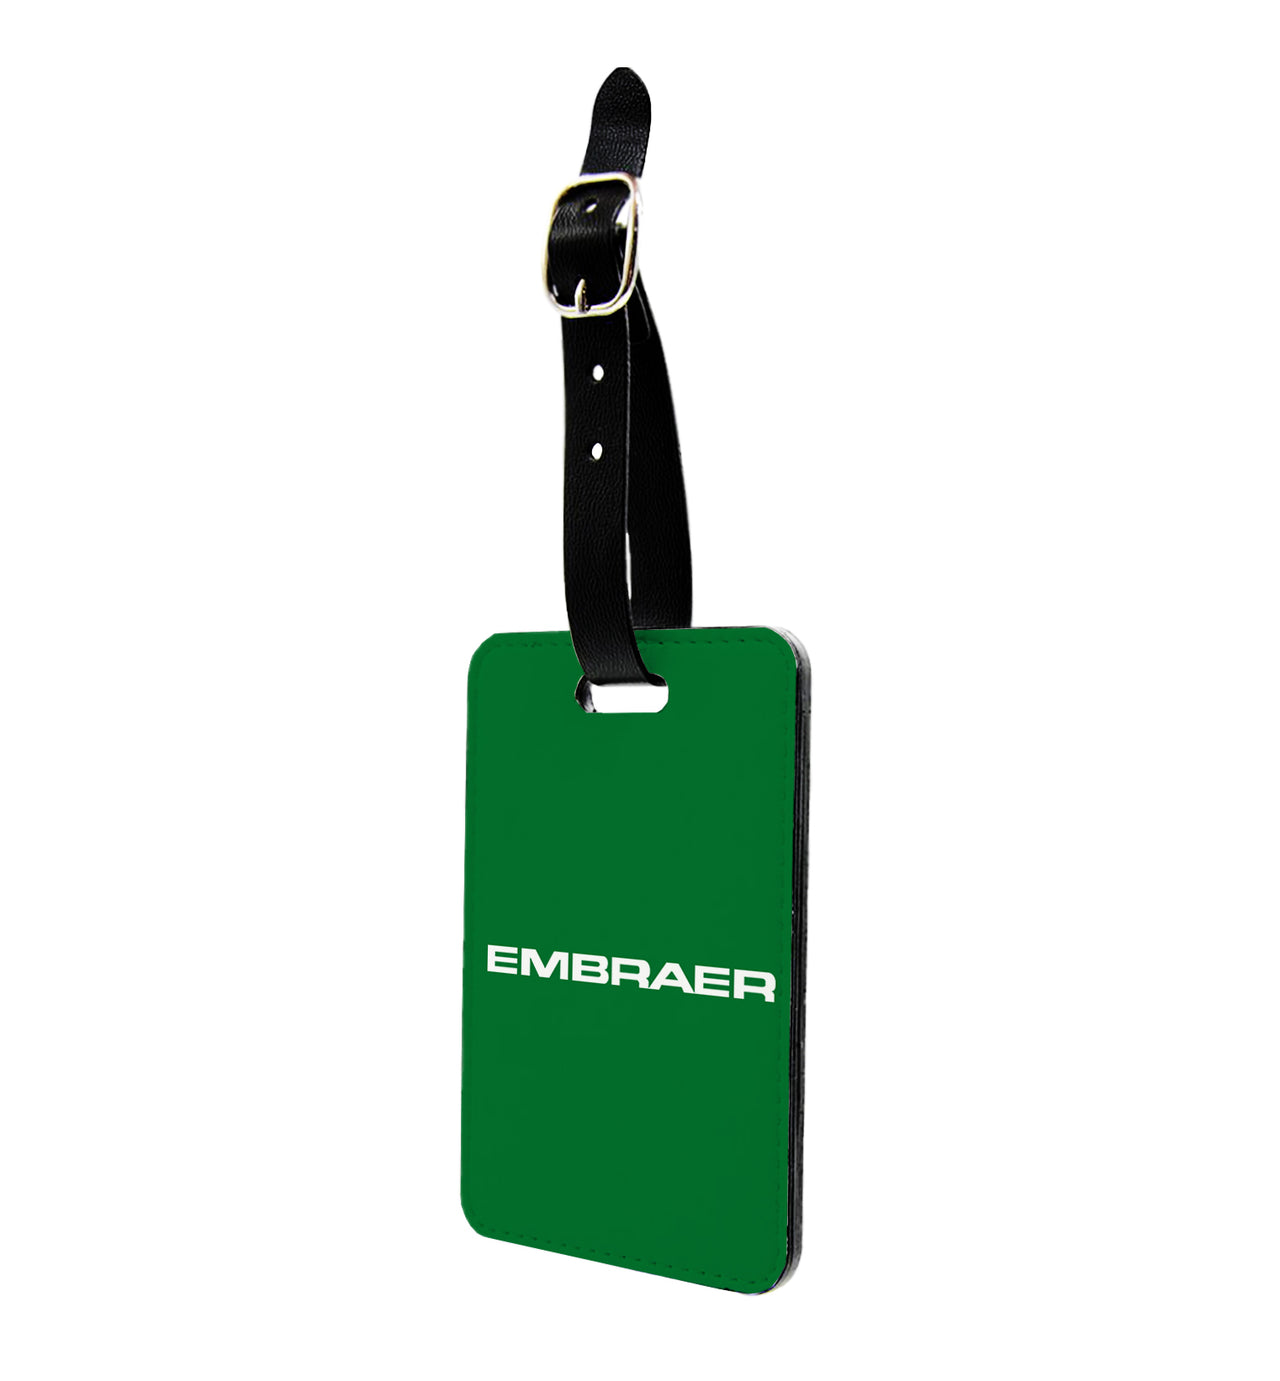 Embraer & Text Designed Luggage Tag